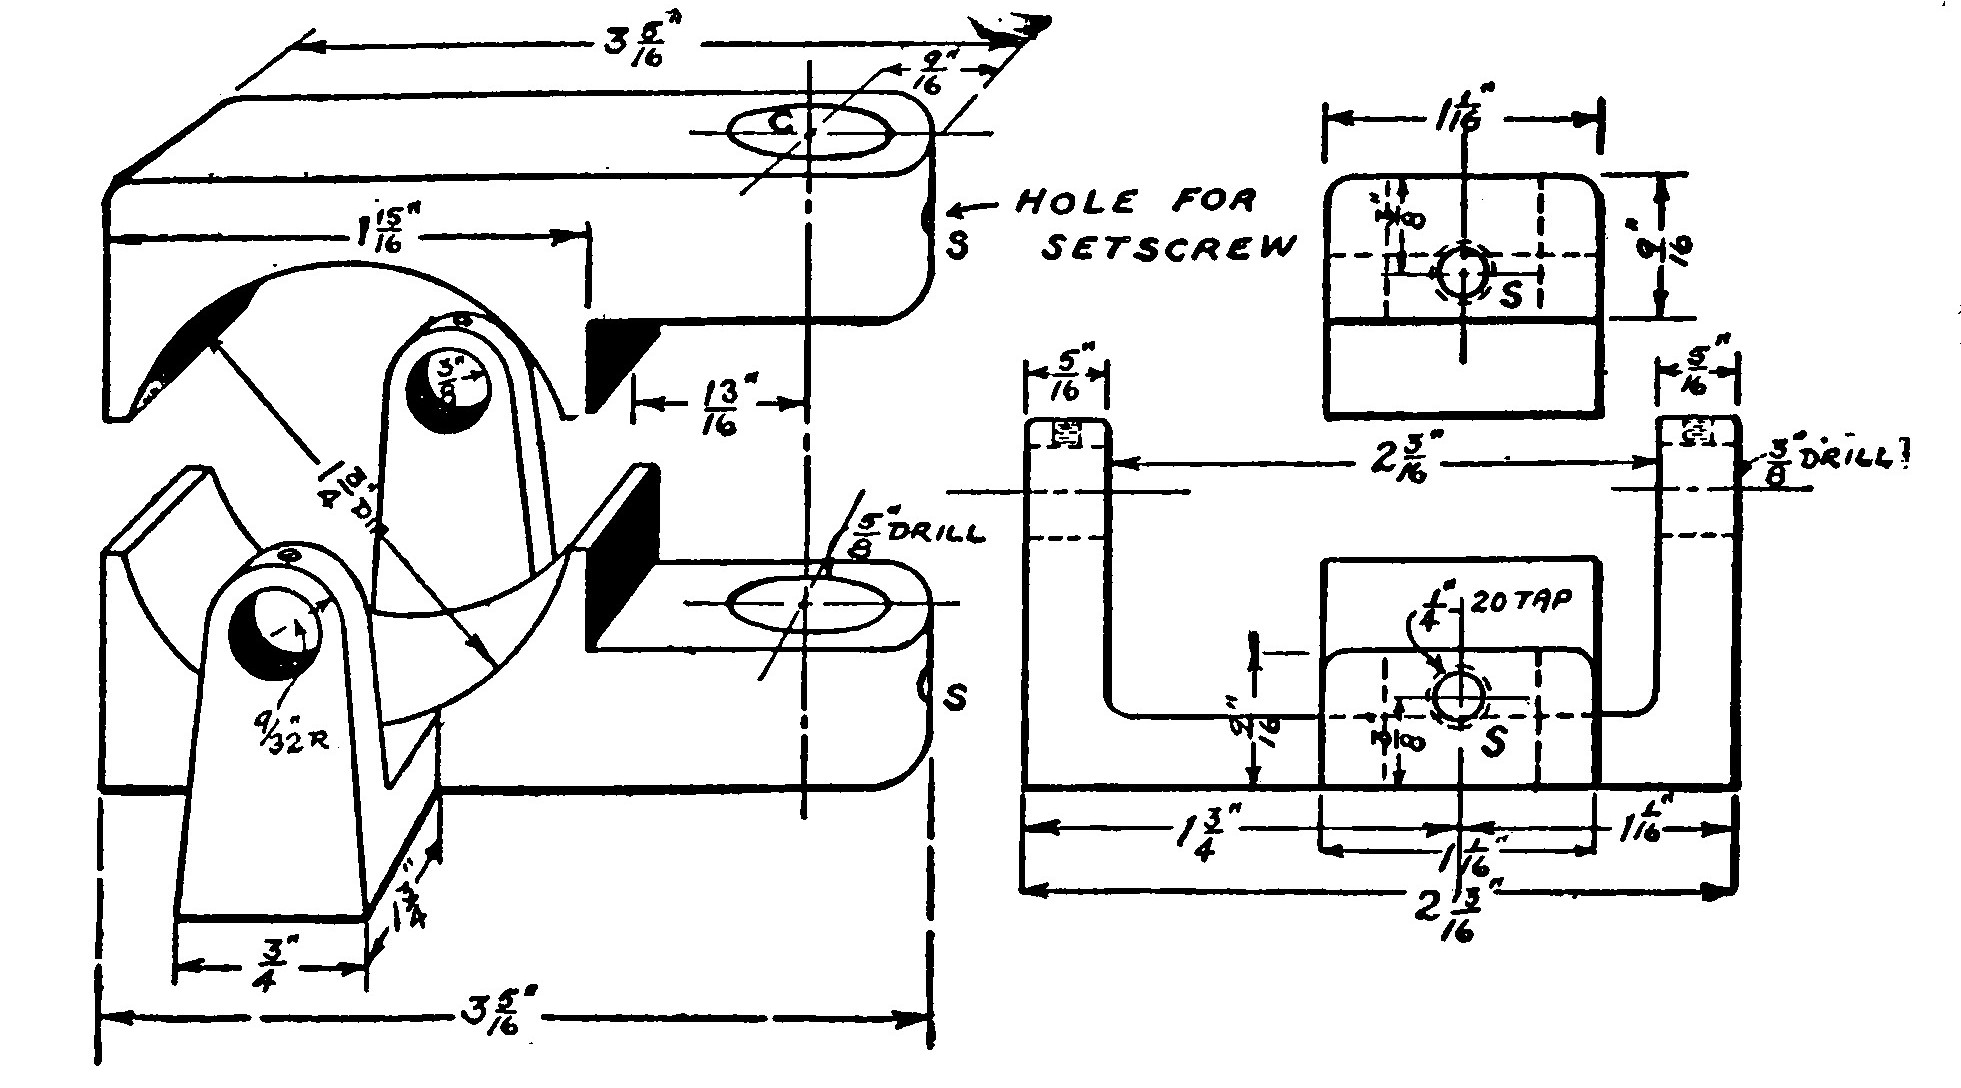 FIG. 68.—Details of the Field Frame for the Horizontal Power Motor.